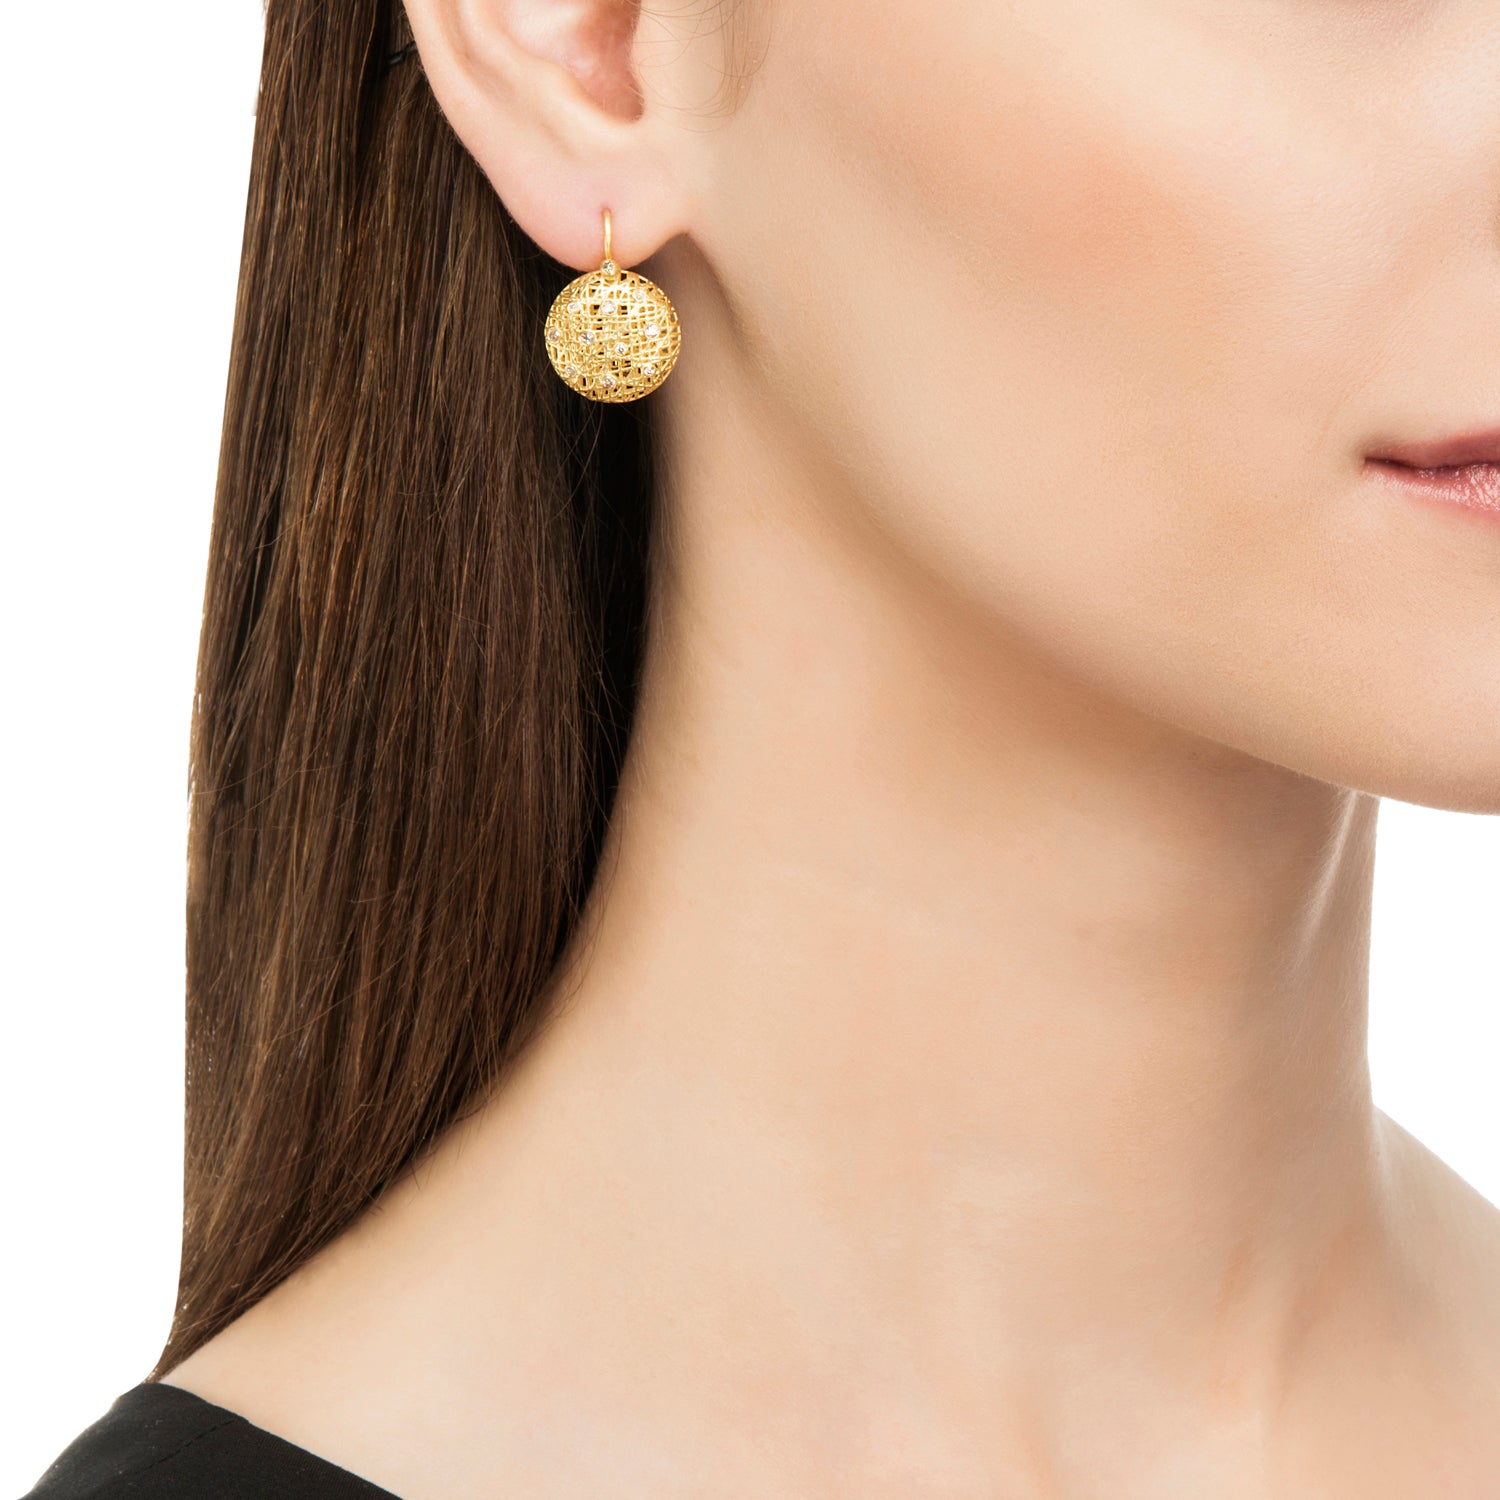 Round 9ct Gold Stud Earrings with Cubic Zirconia | Posh Totty Designs